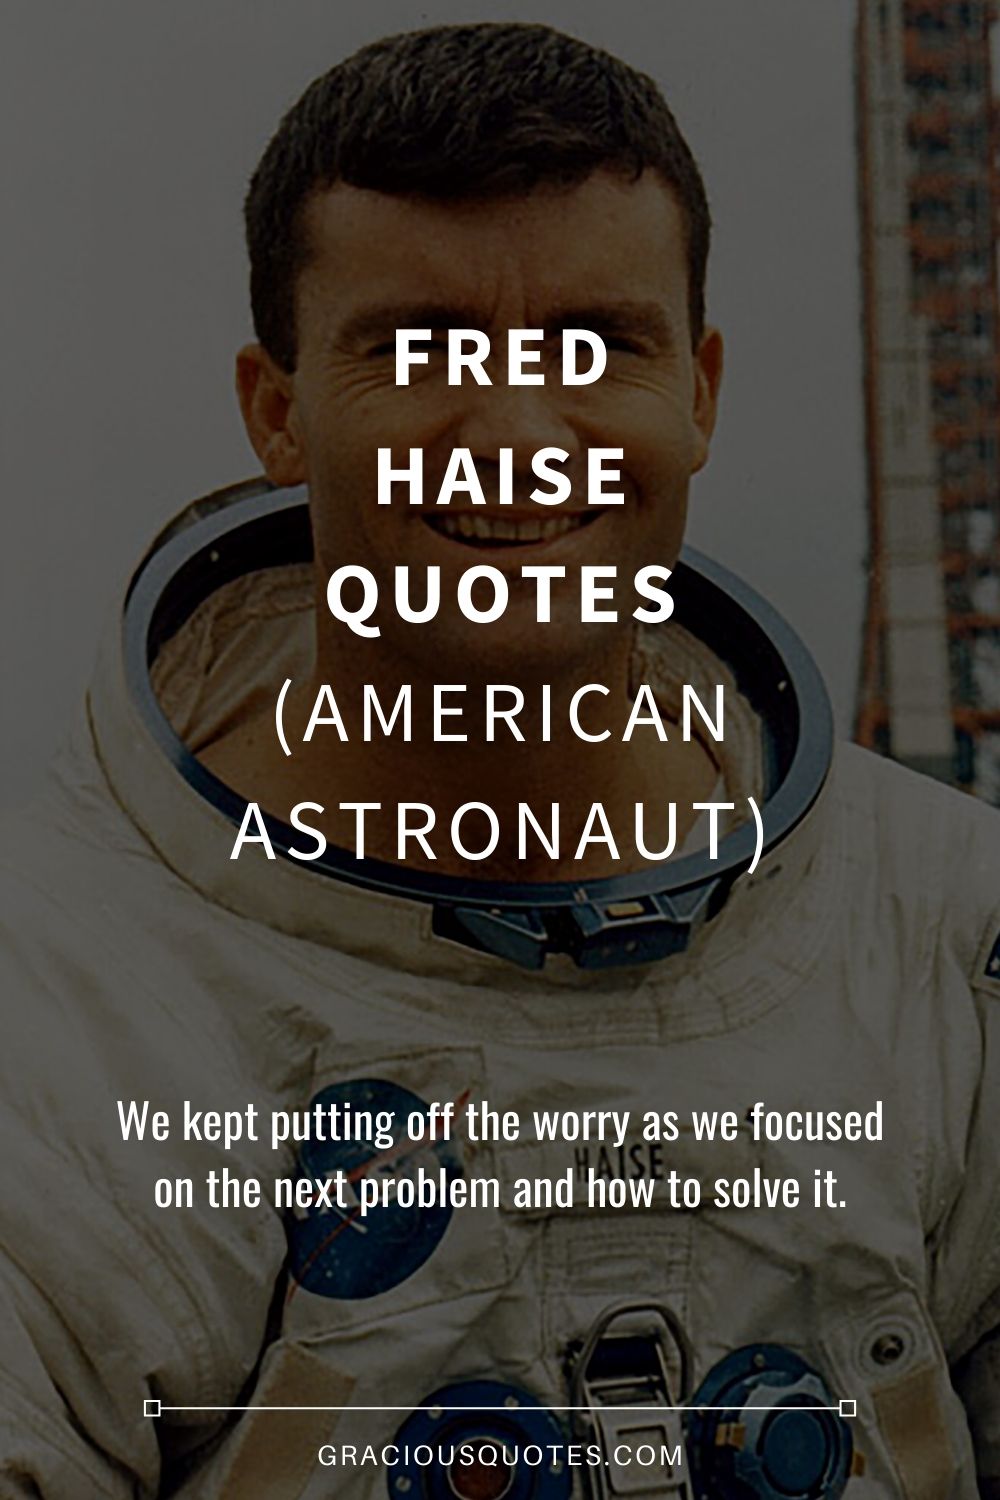 Fred Haise Quotes (AMERICAN ASTRONAUT) - Gracious Quotes